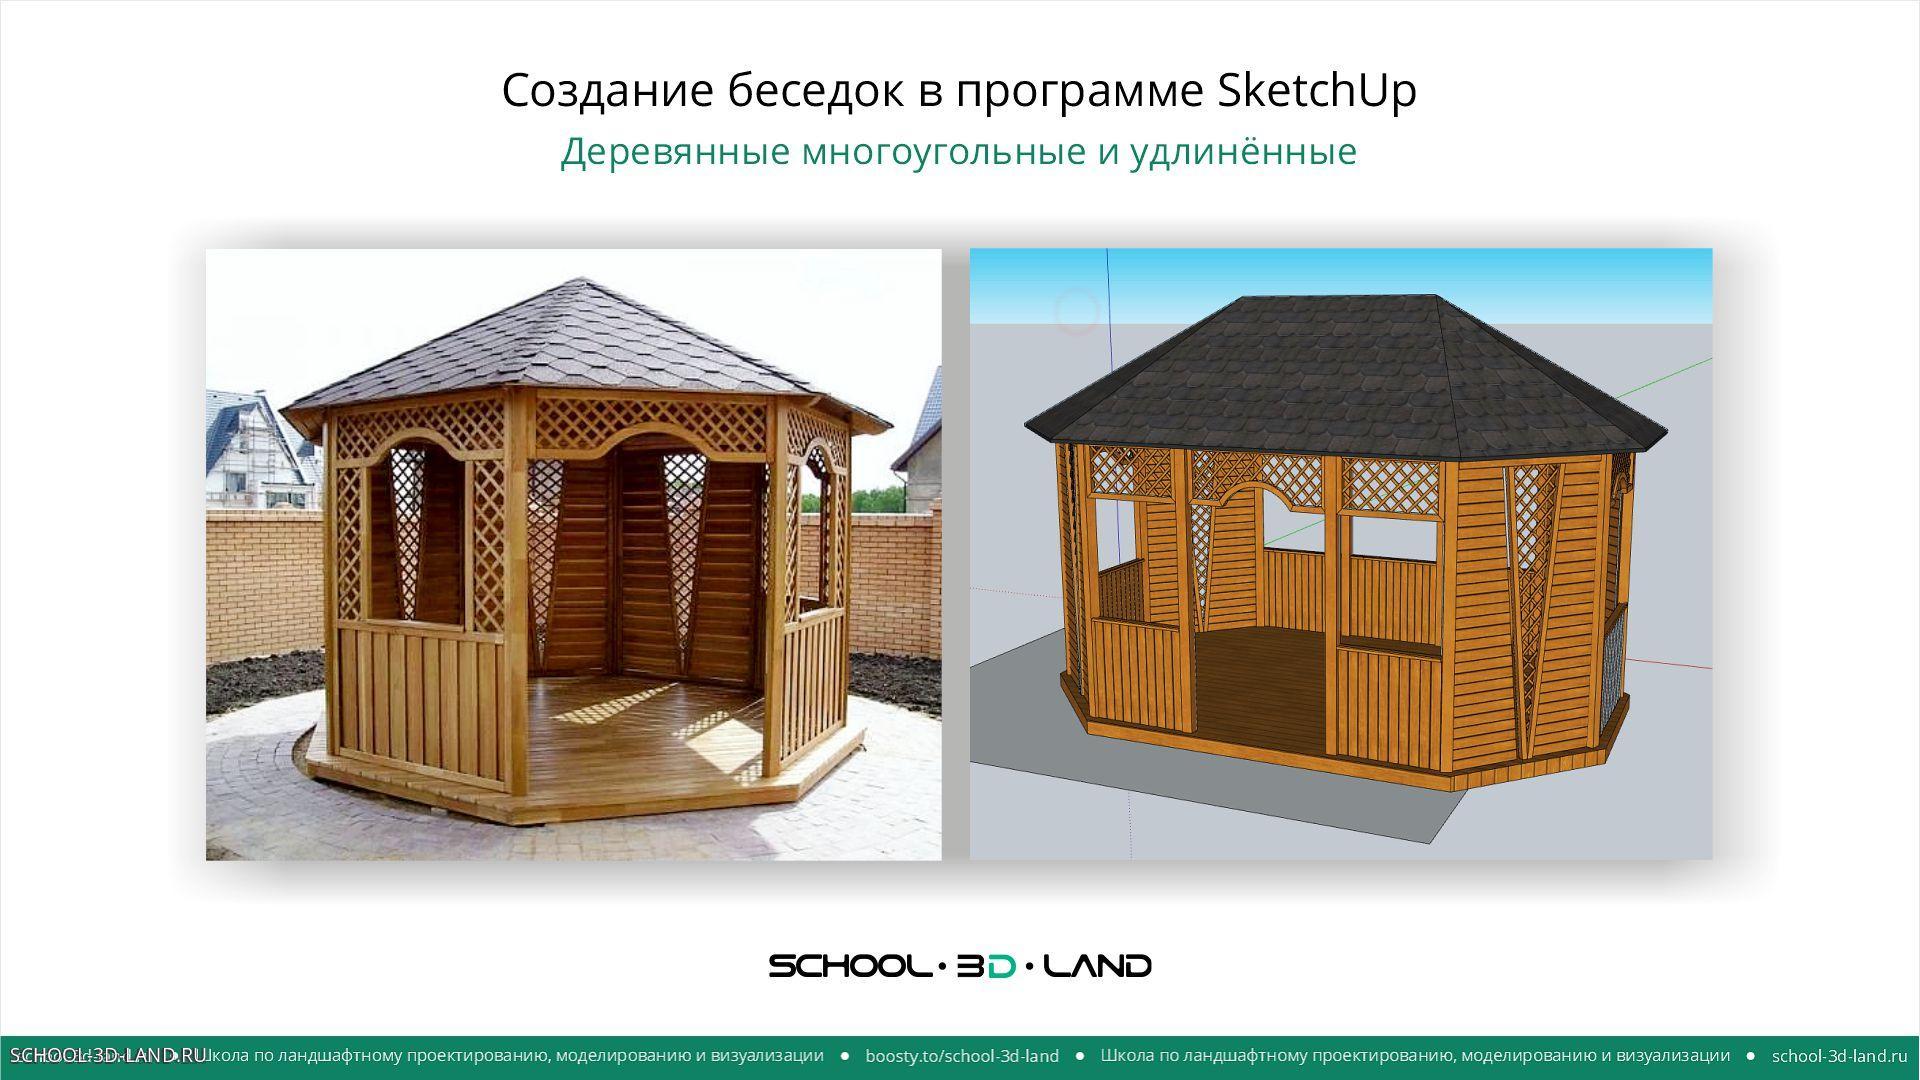 Creating gazebos in SketchUp. Wooden polygonal and elongated